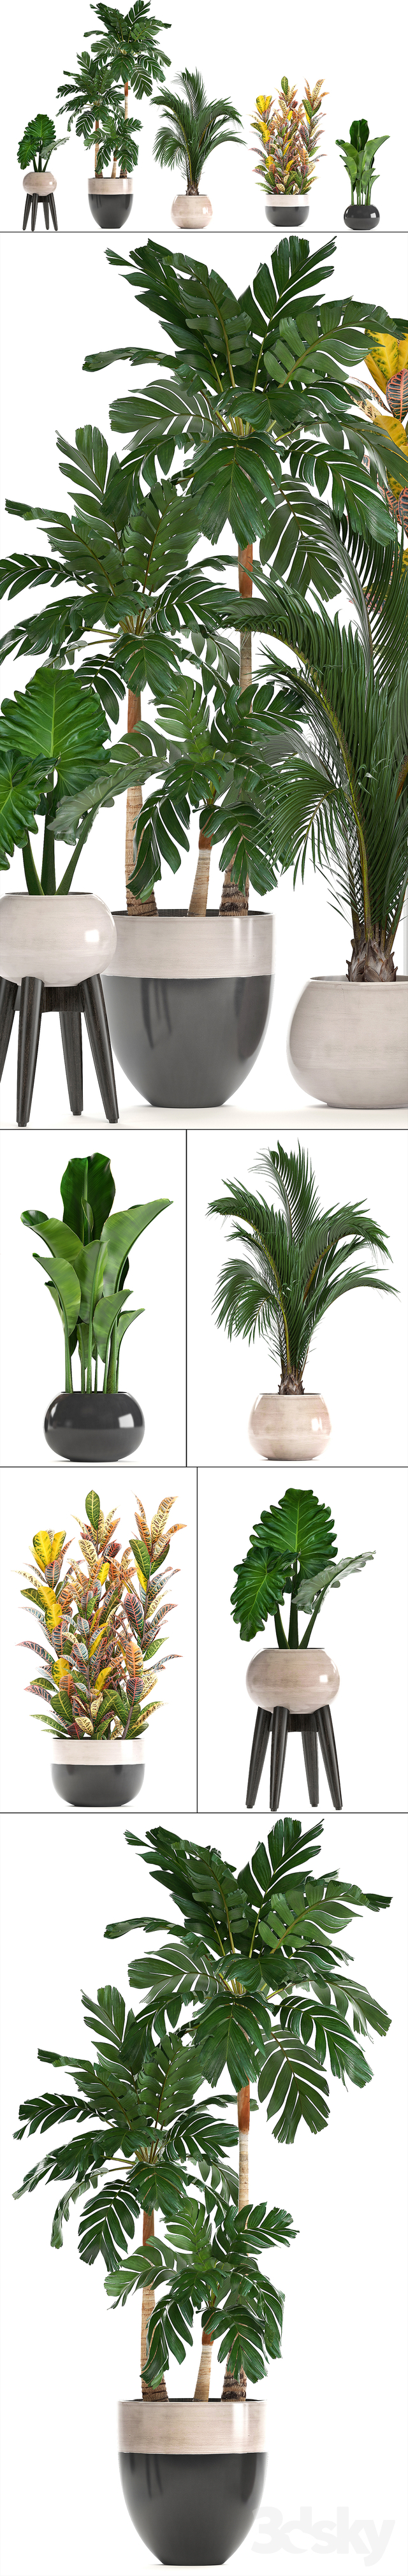 Collection of plants.